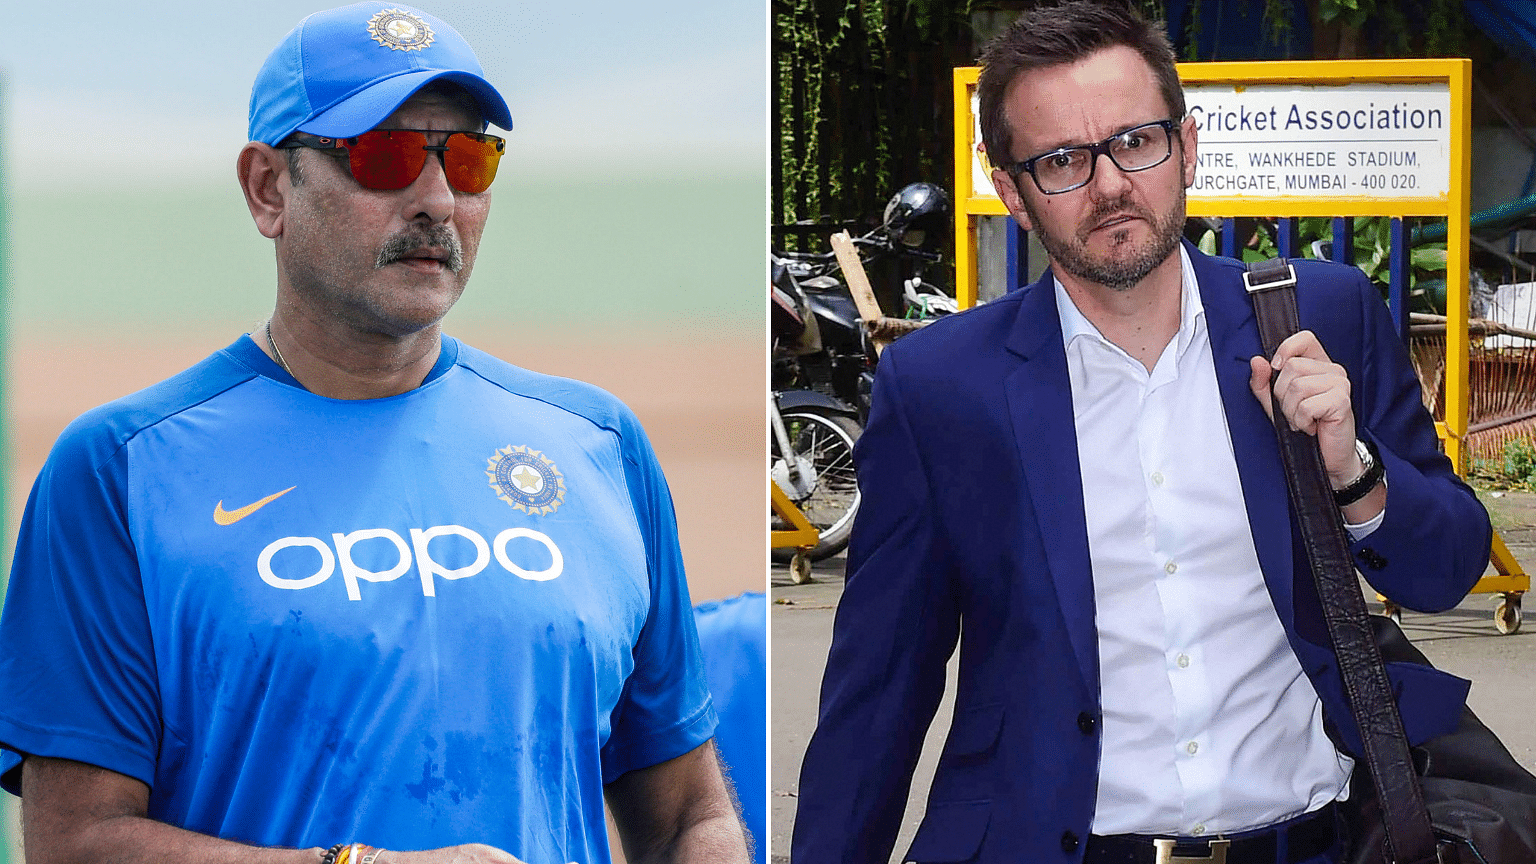 Incumbent Ravi Shastri (left) pipped Mike Hesson for the post of Team India Head Coach.